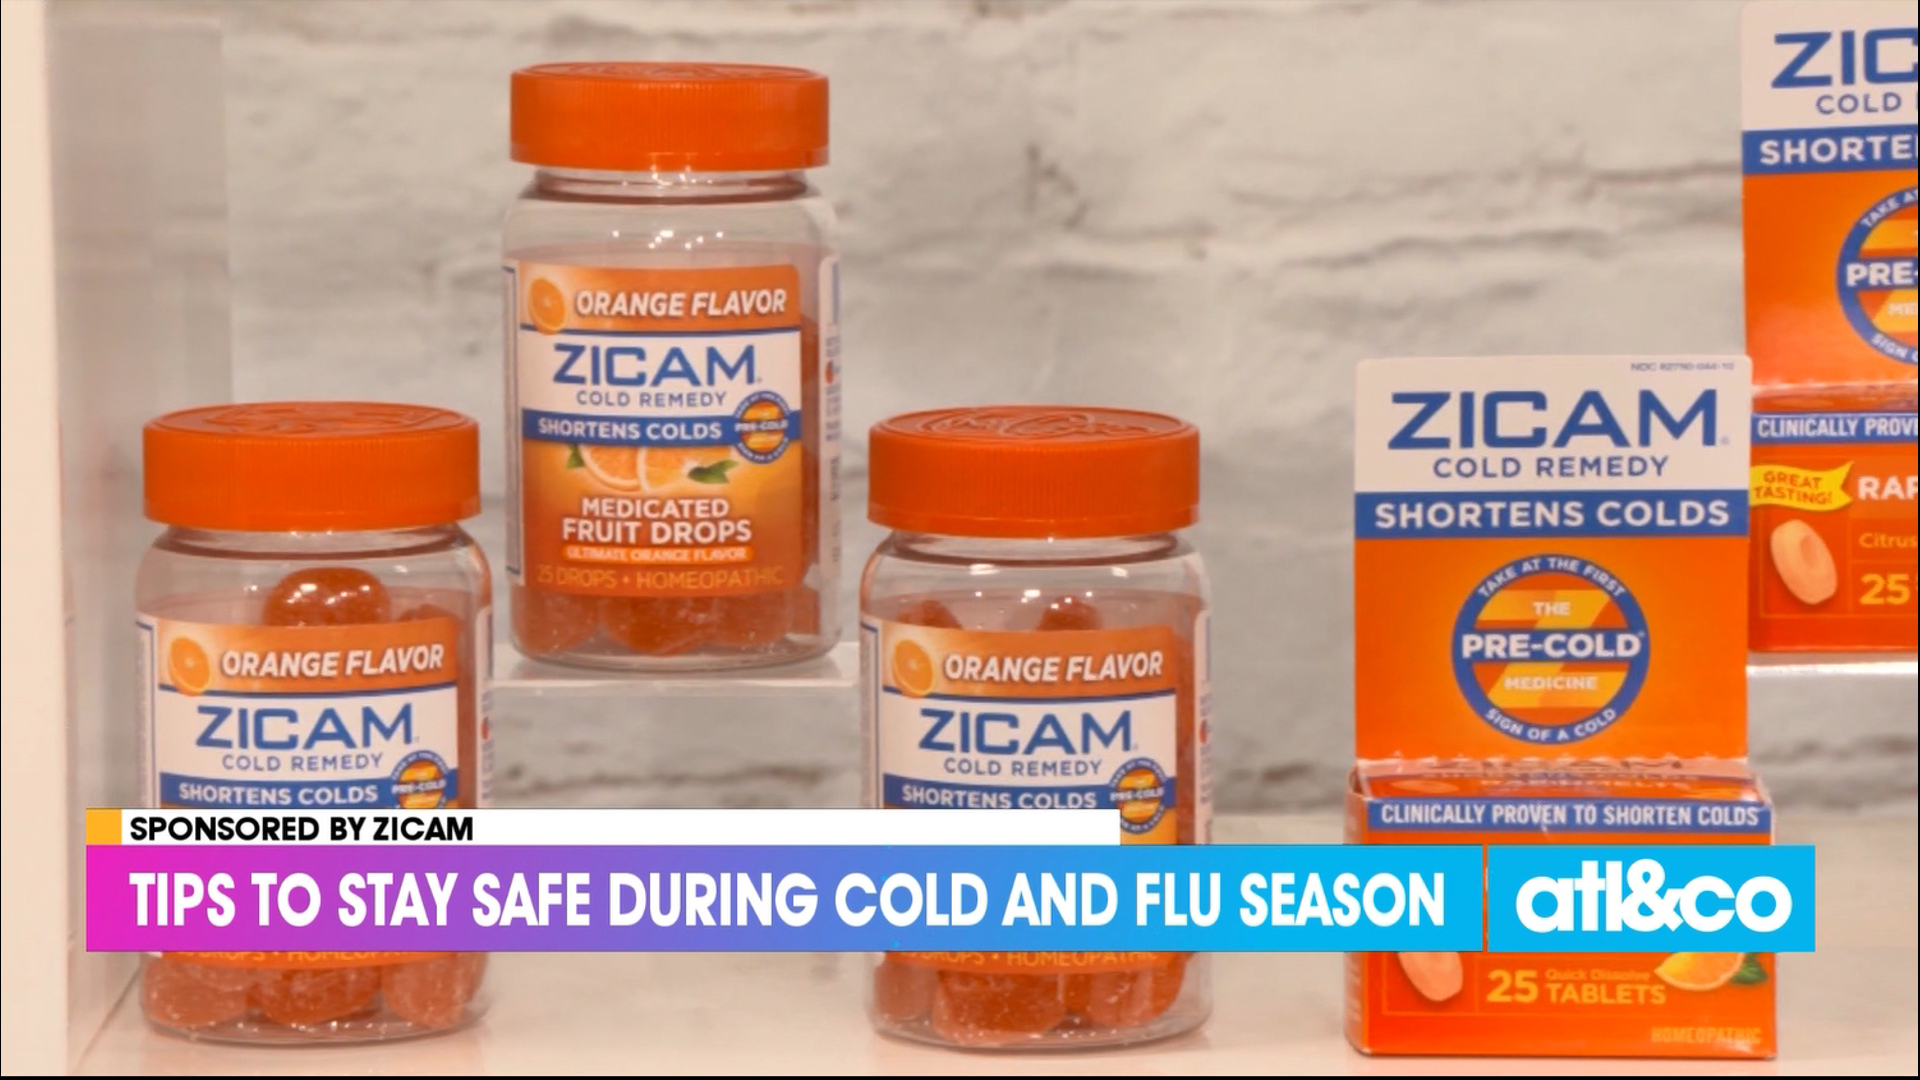 Dr. Tania Elliot has tips to protect you and your family this flu season.